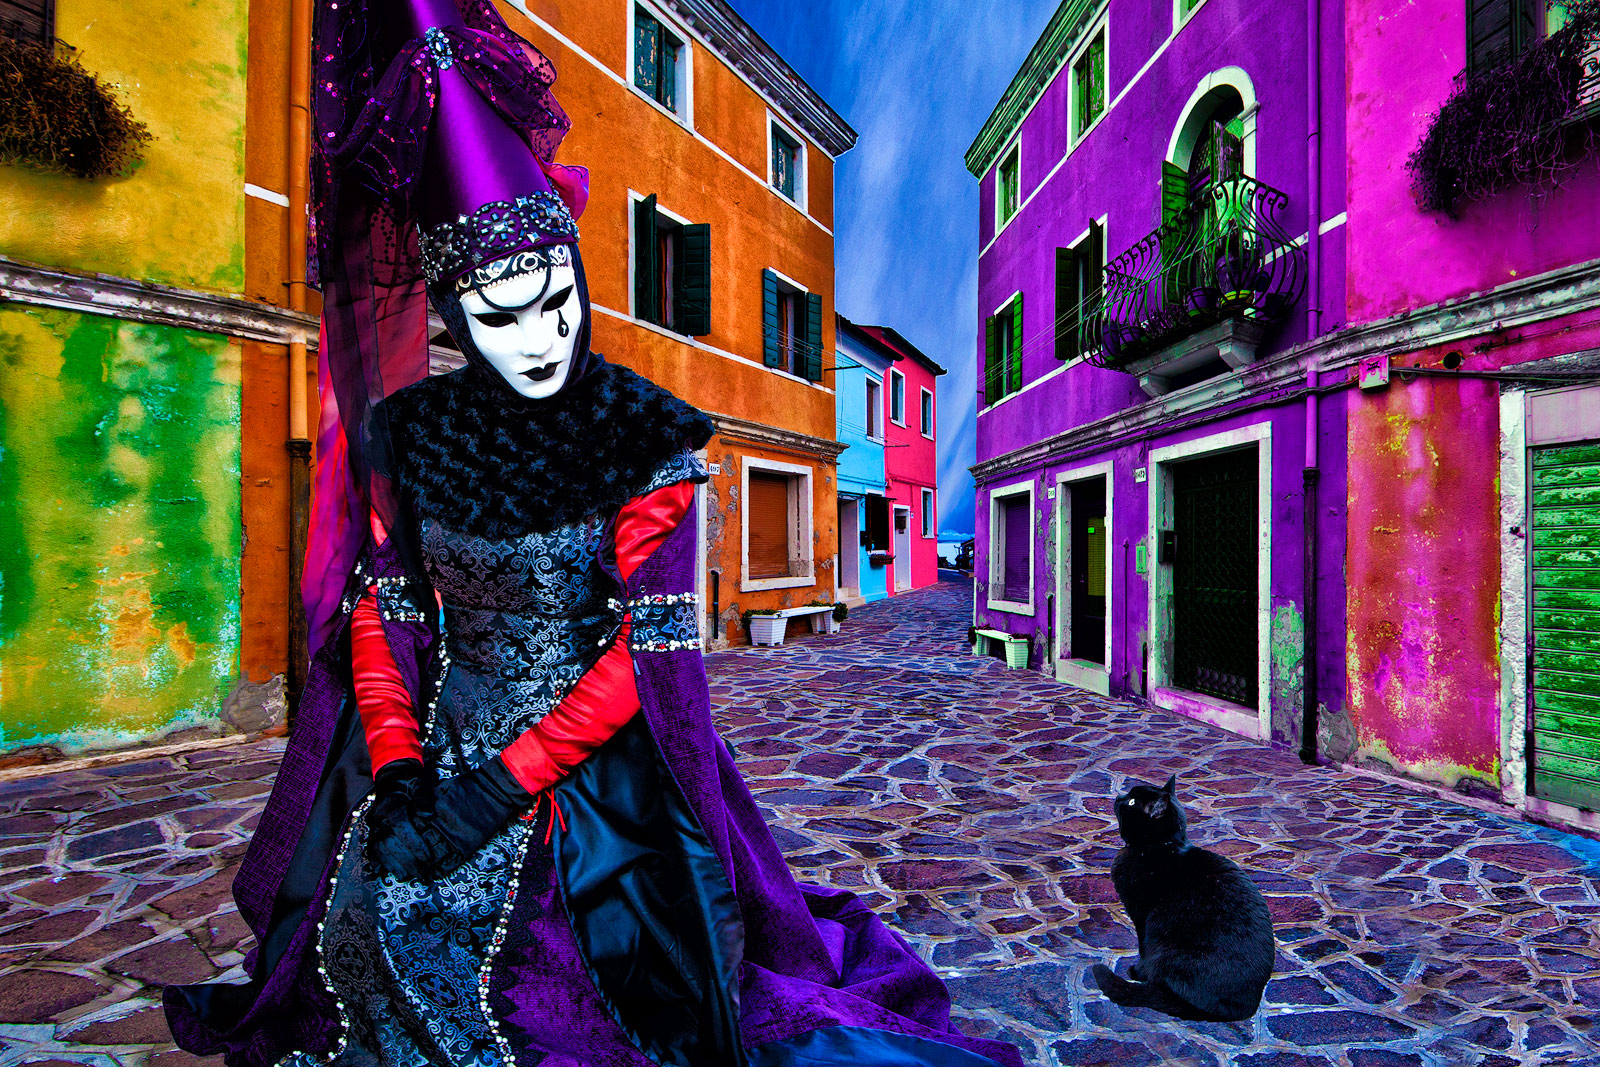 Carnival composite image from Burano Island.